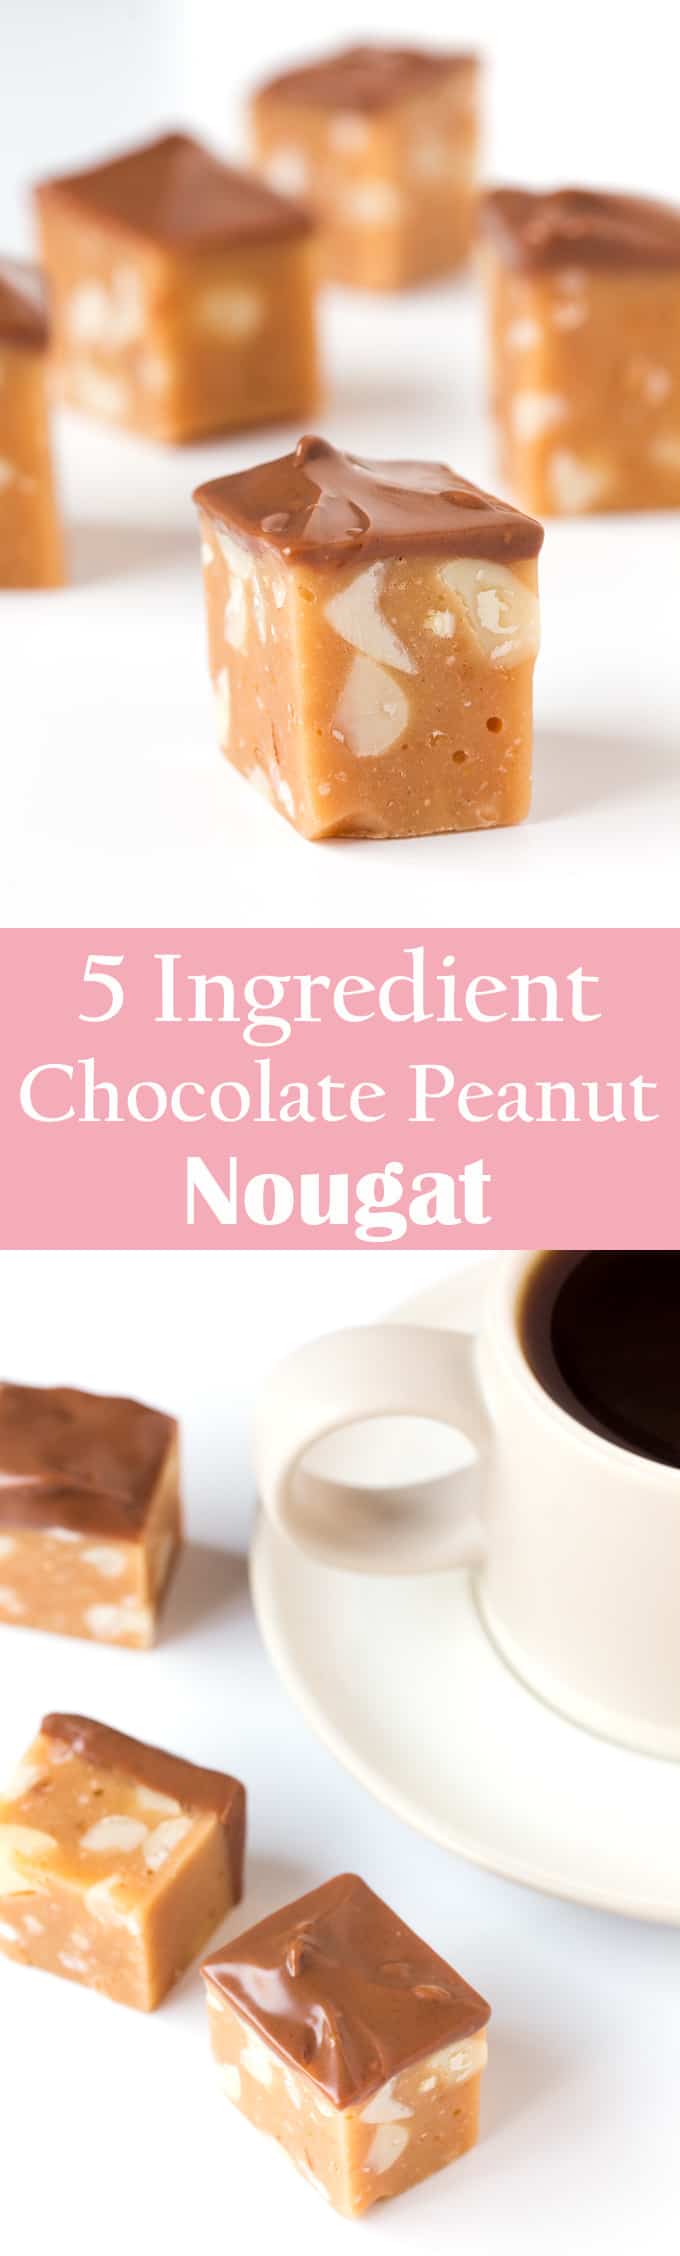 5-Ingredient chocolate Peanut Nougat - no baking, whisking or thermometers needed. Just melt, mix, cool, cut and dip. Sweet, chewy and delicious!